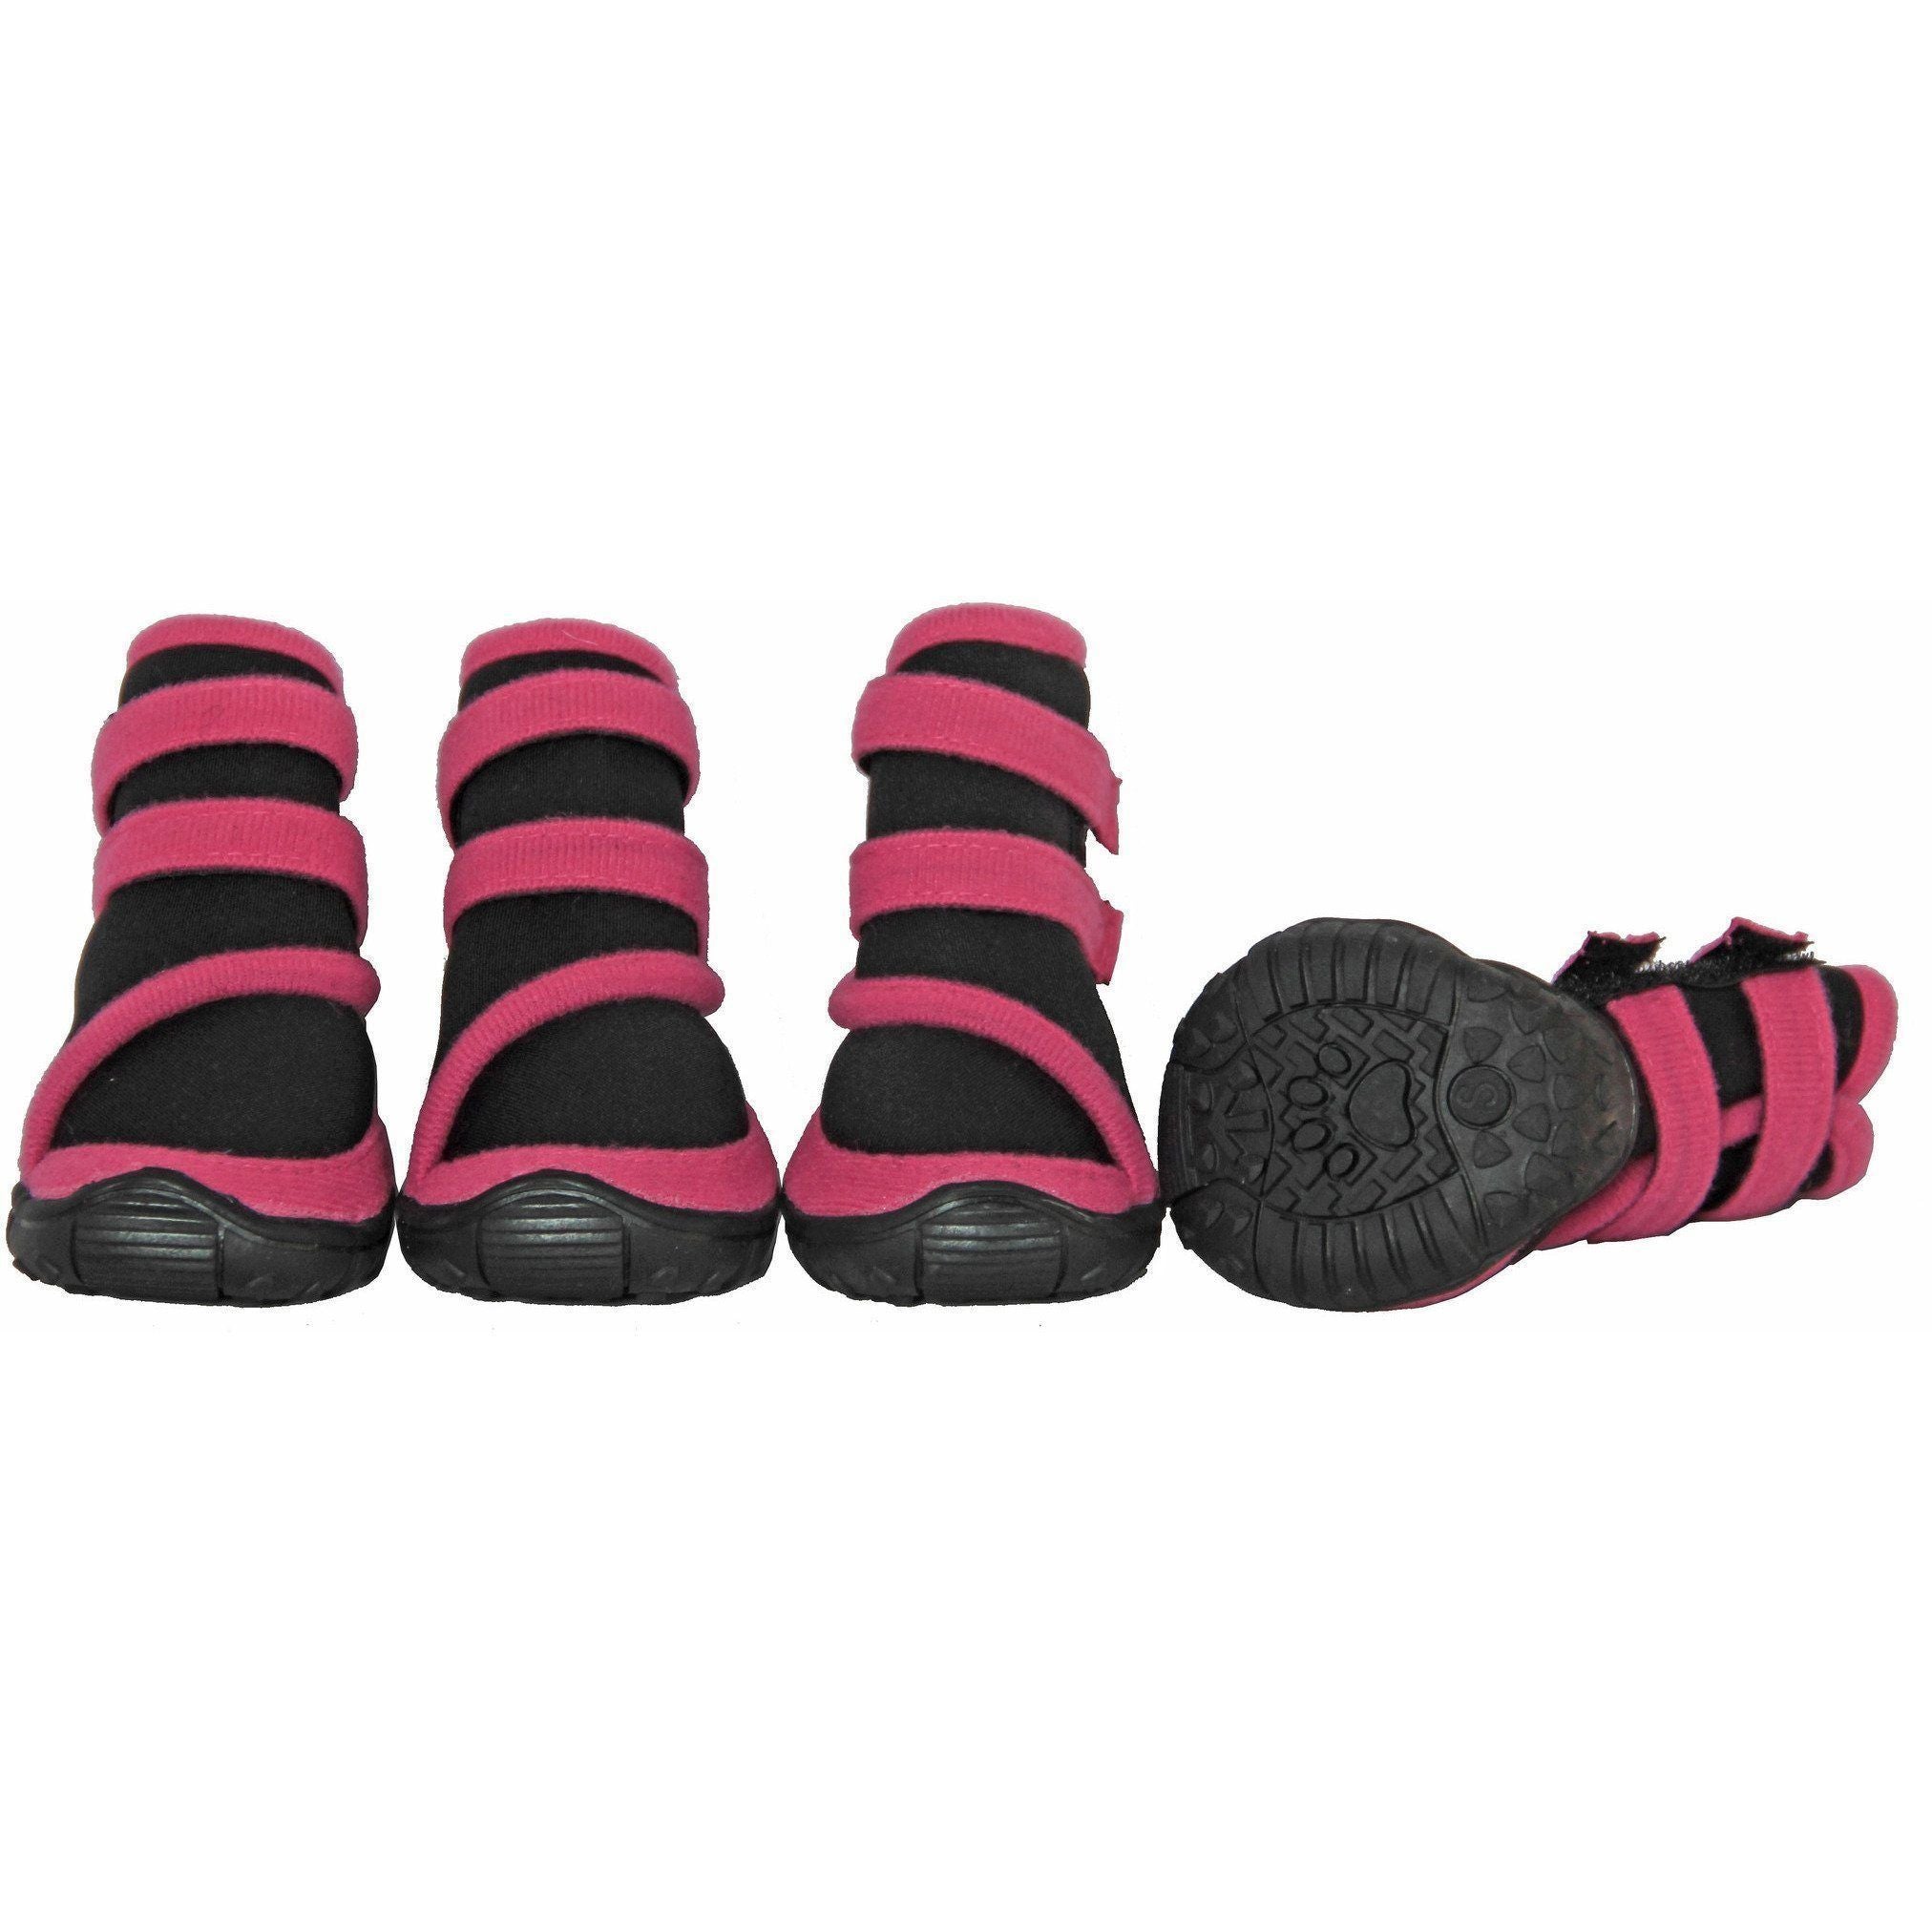 Pet Life ® 'Performance-Coned' Premium Stretch High Ankle Support Dog Shoes - Set Of 4 X-Small Black/Pink